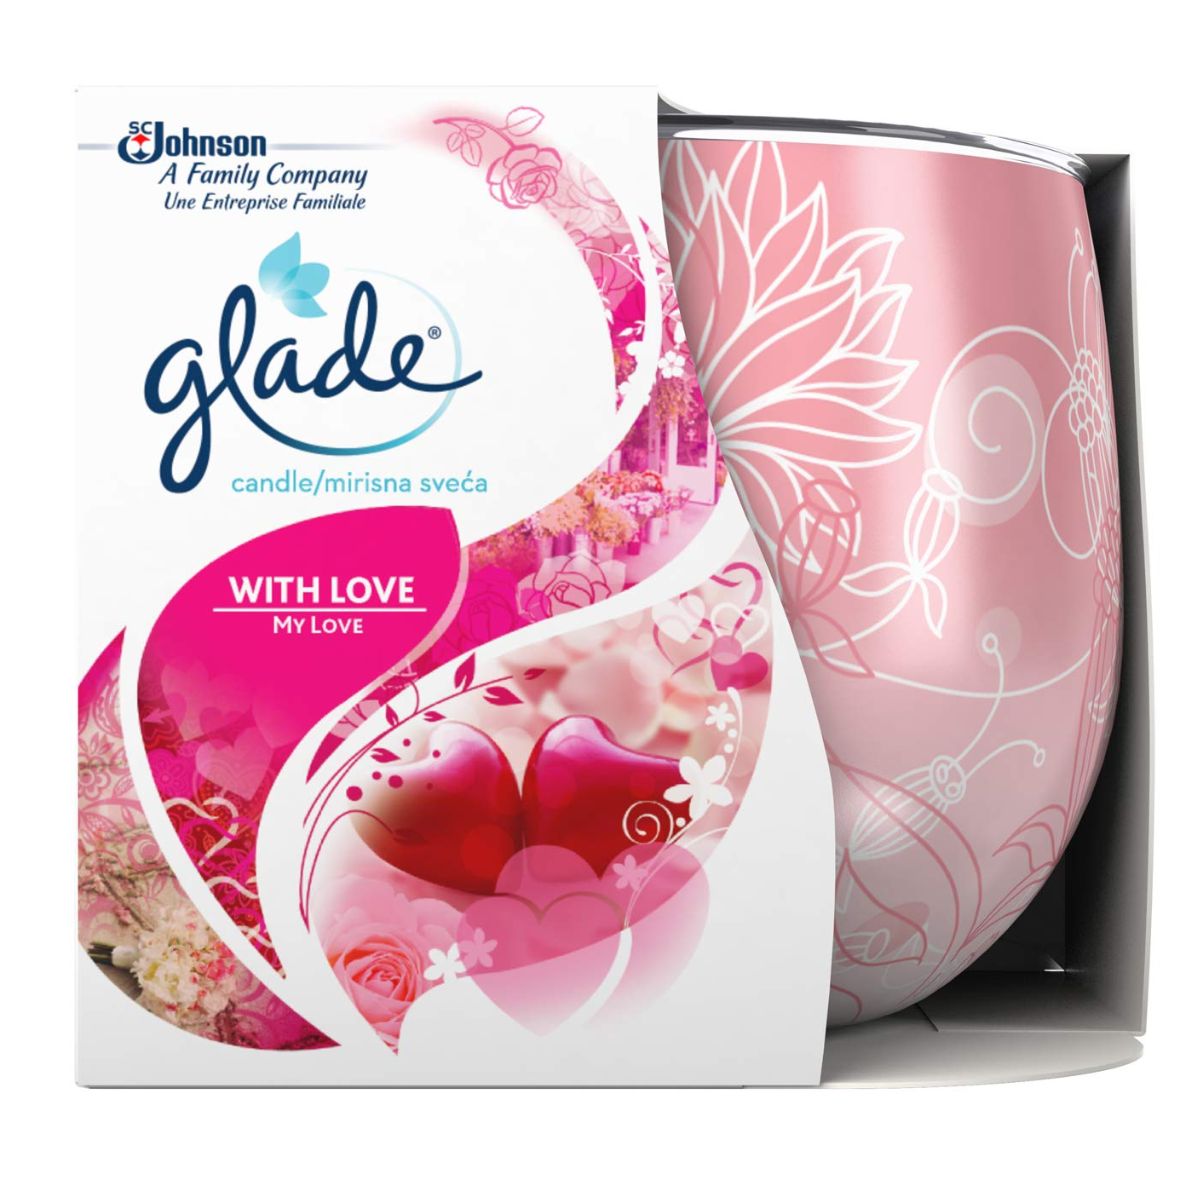 Glade - Candle With Love - 120g scented hand sanitizer.